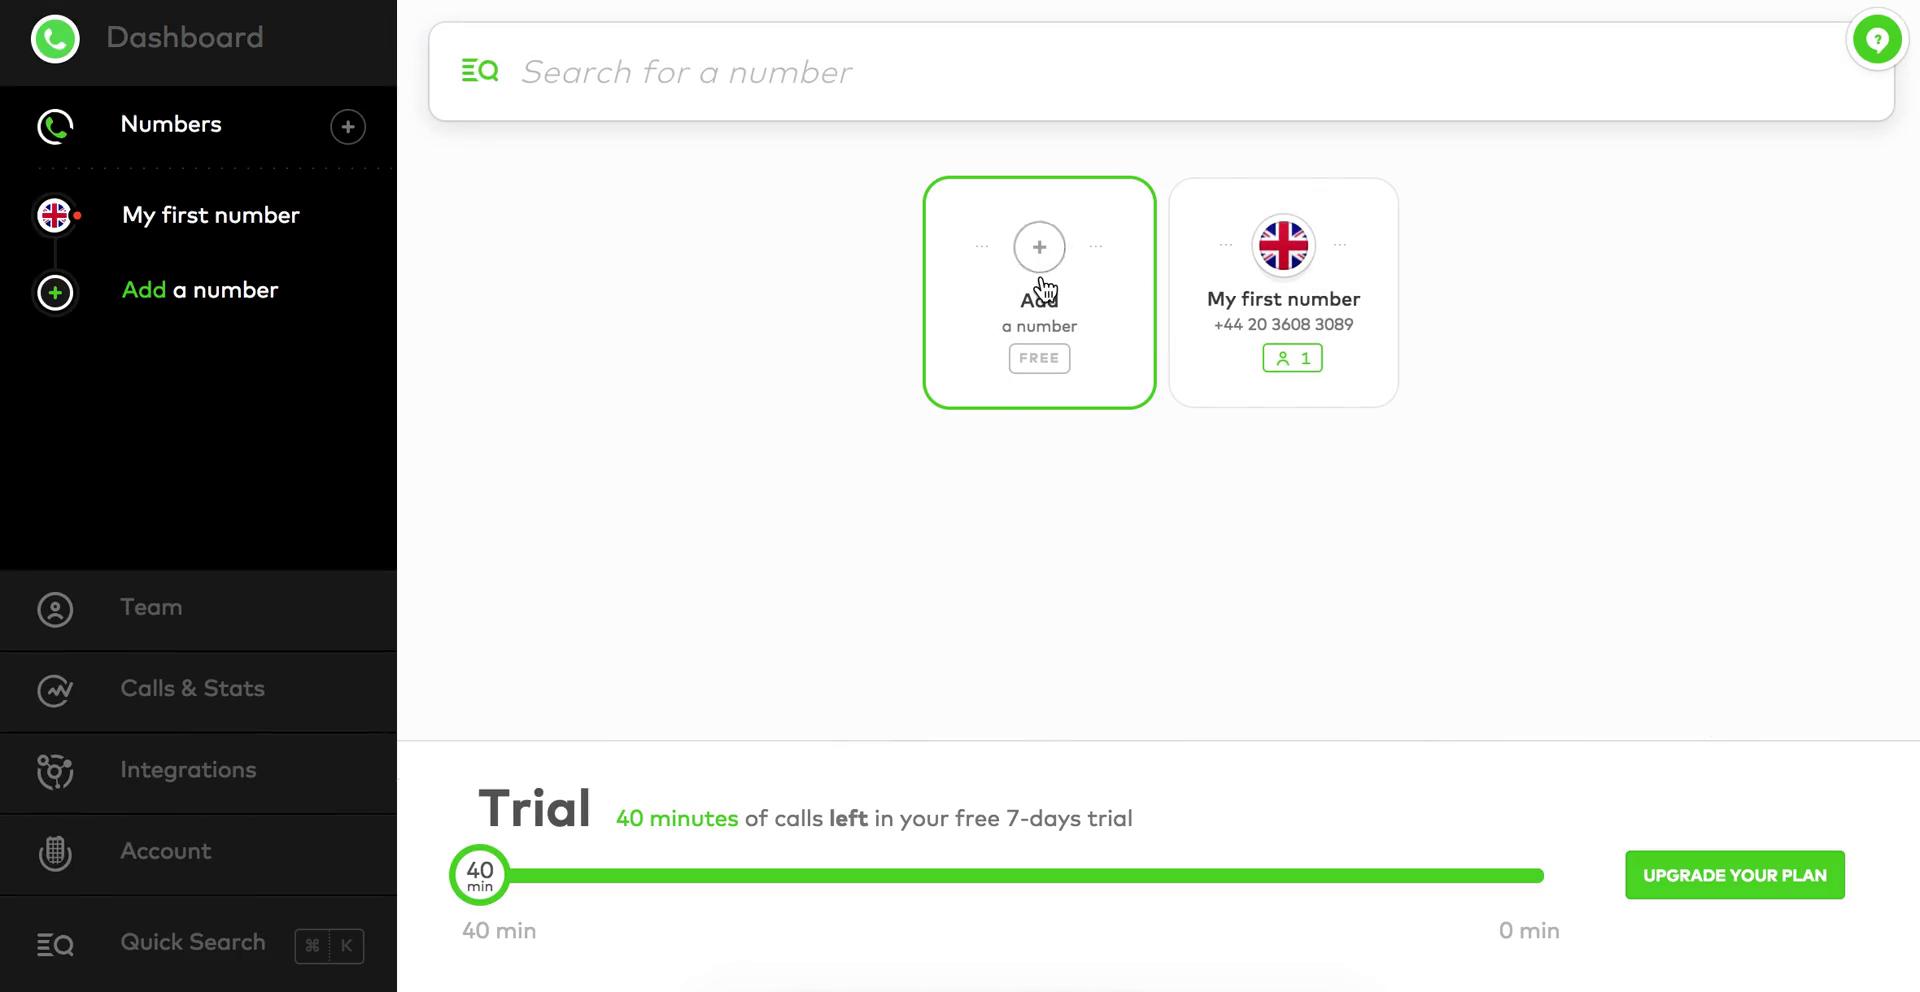 Screenshot of on Adding a phone number on Aircall user flow